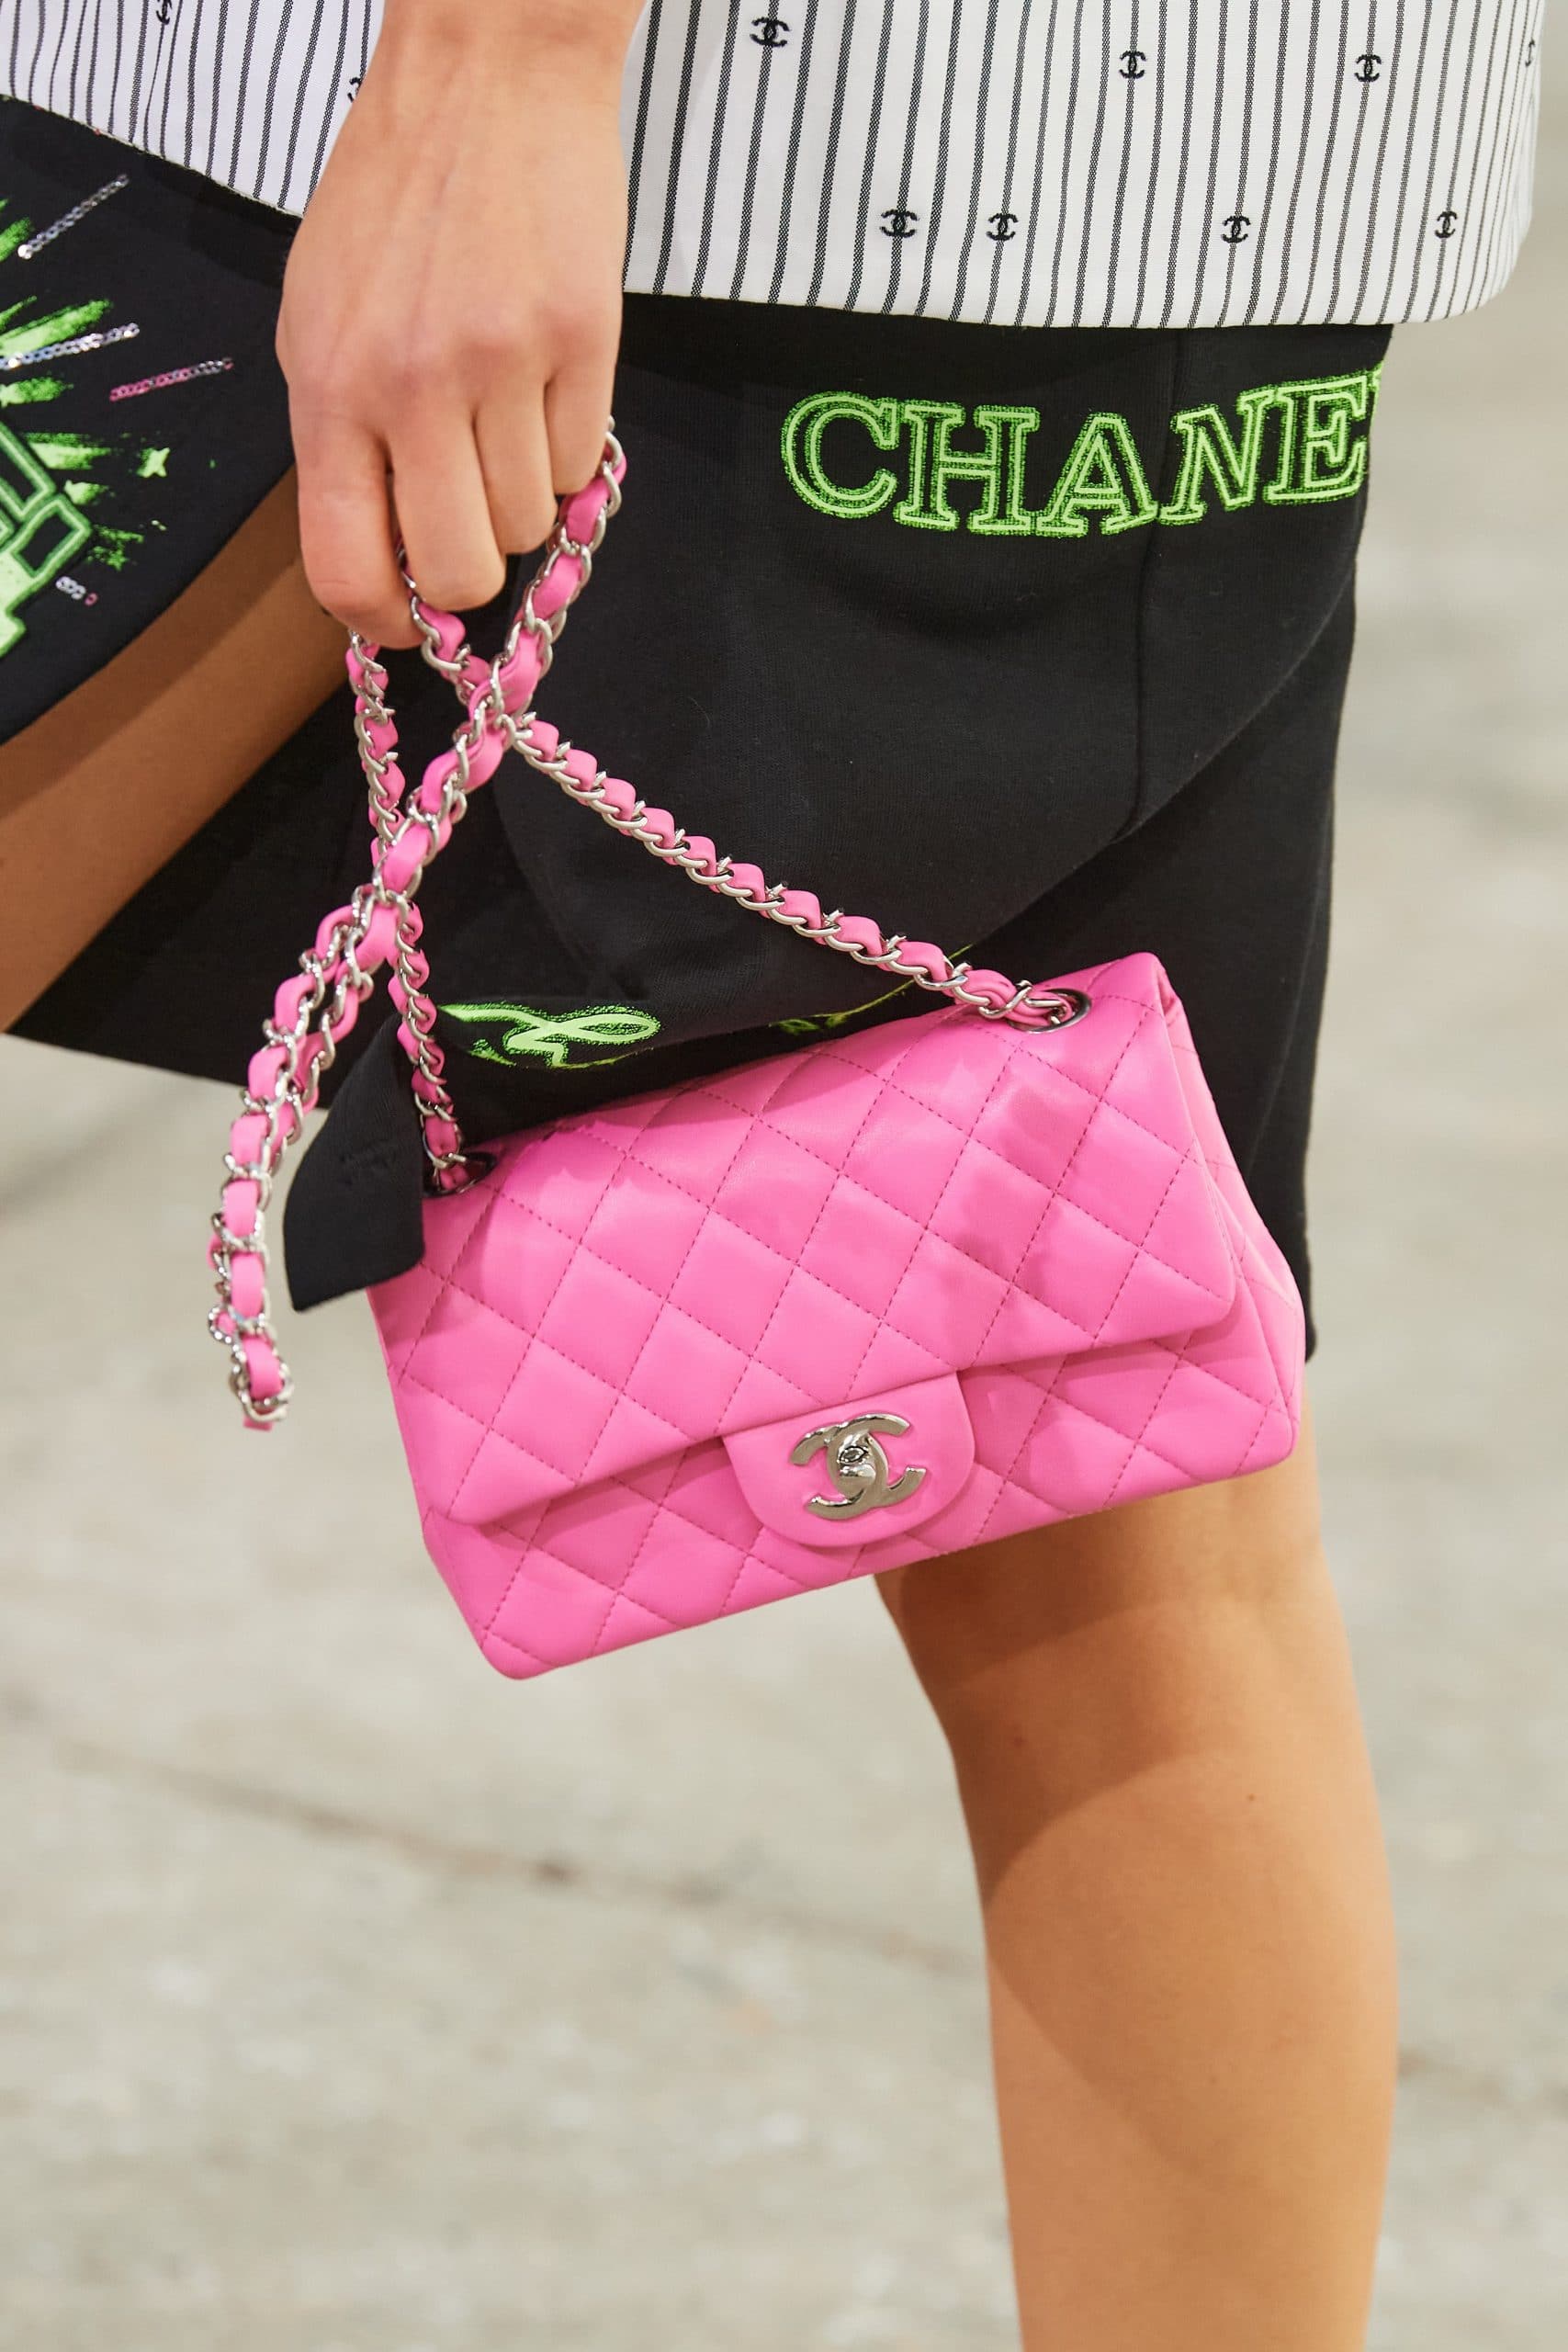 Chanel Spring/Summer 2021 Runway Bag Collection Featuring Super Tiny